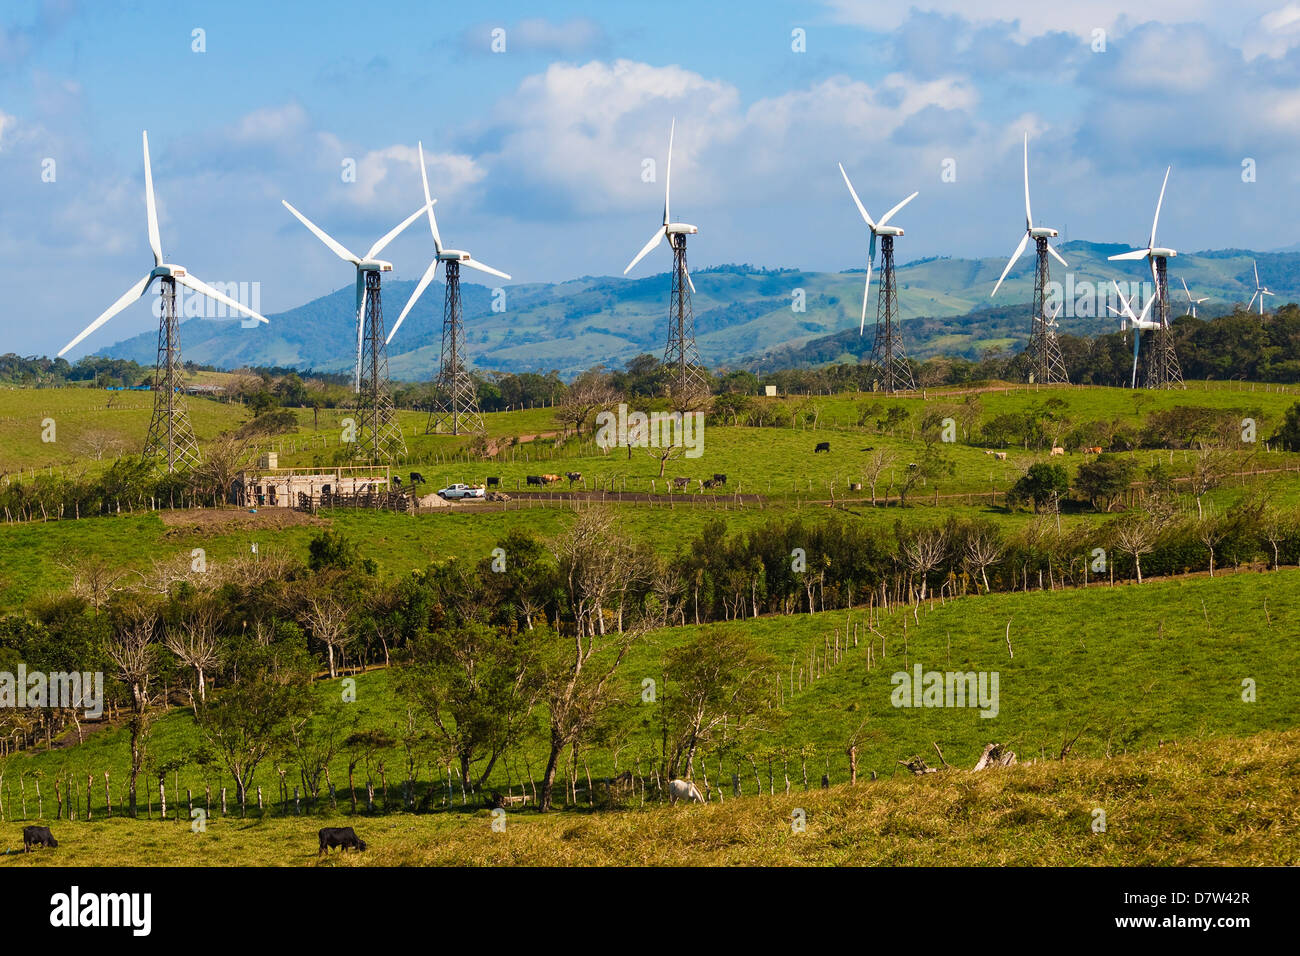 Some of the 55 20MW turbines at the Tilaran wind power farm in hills west of Arenal, Tilaran, Guanacaste Province, Costa Rica Stock Photo